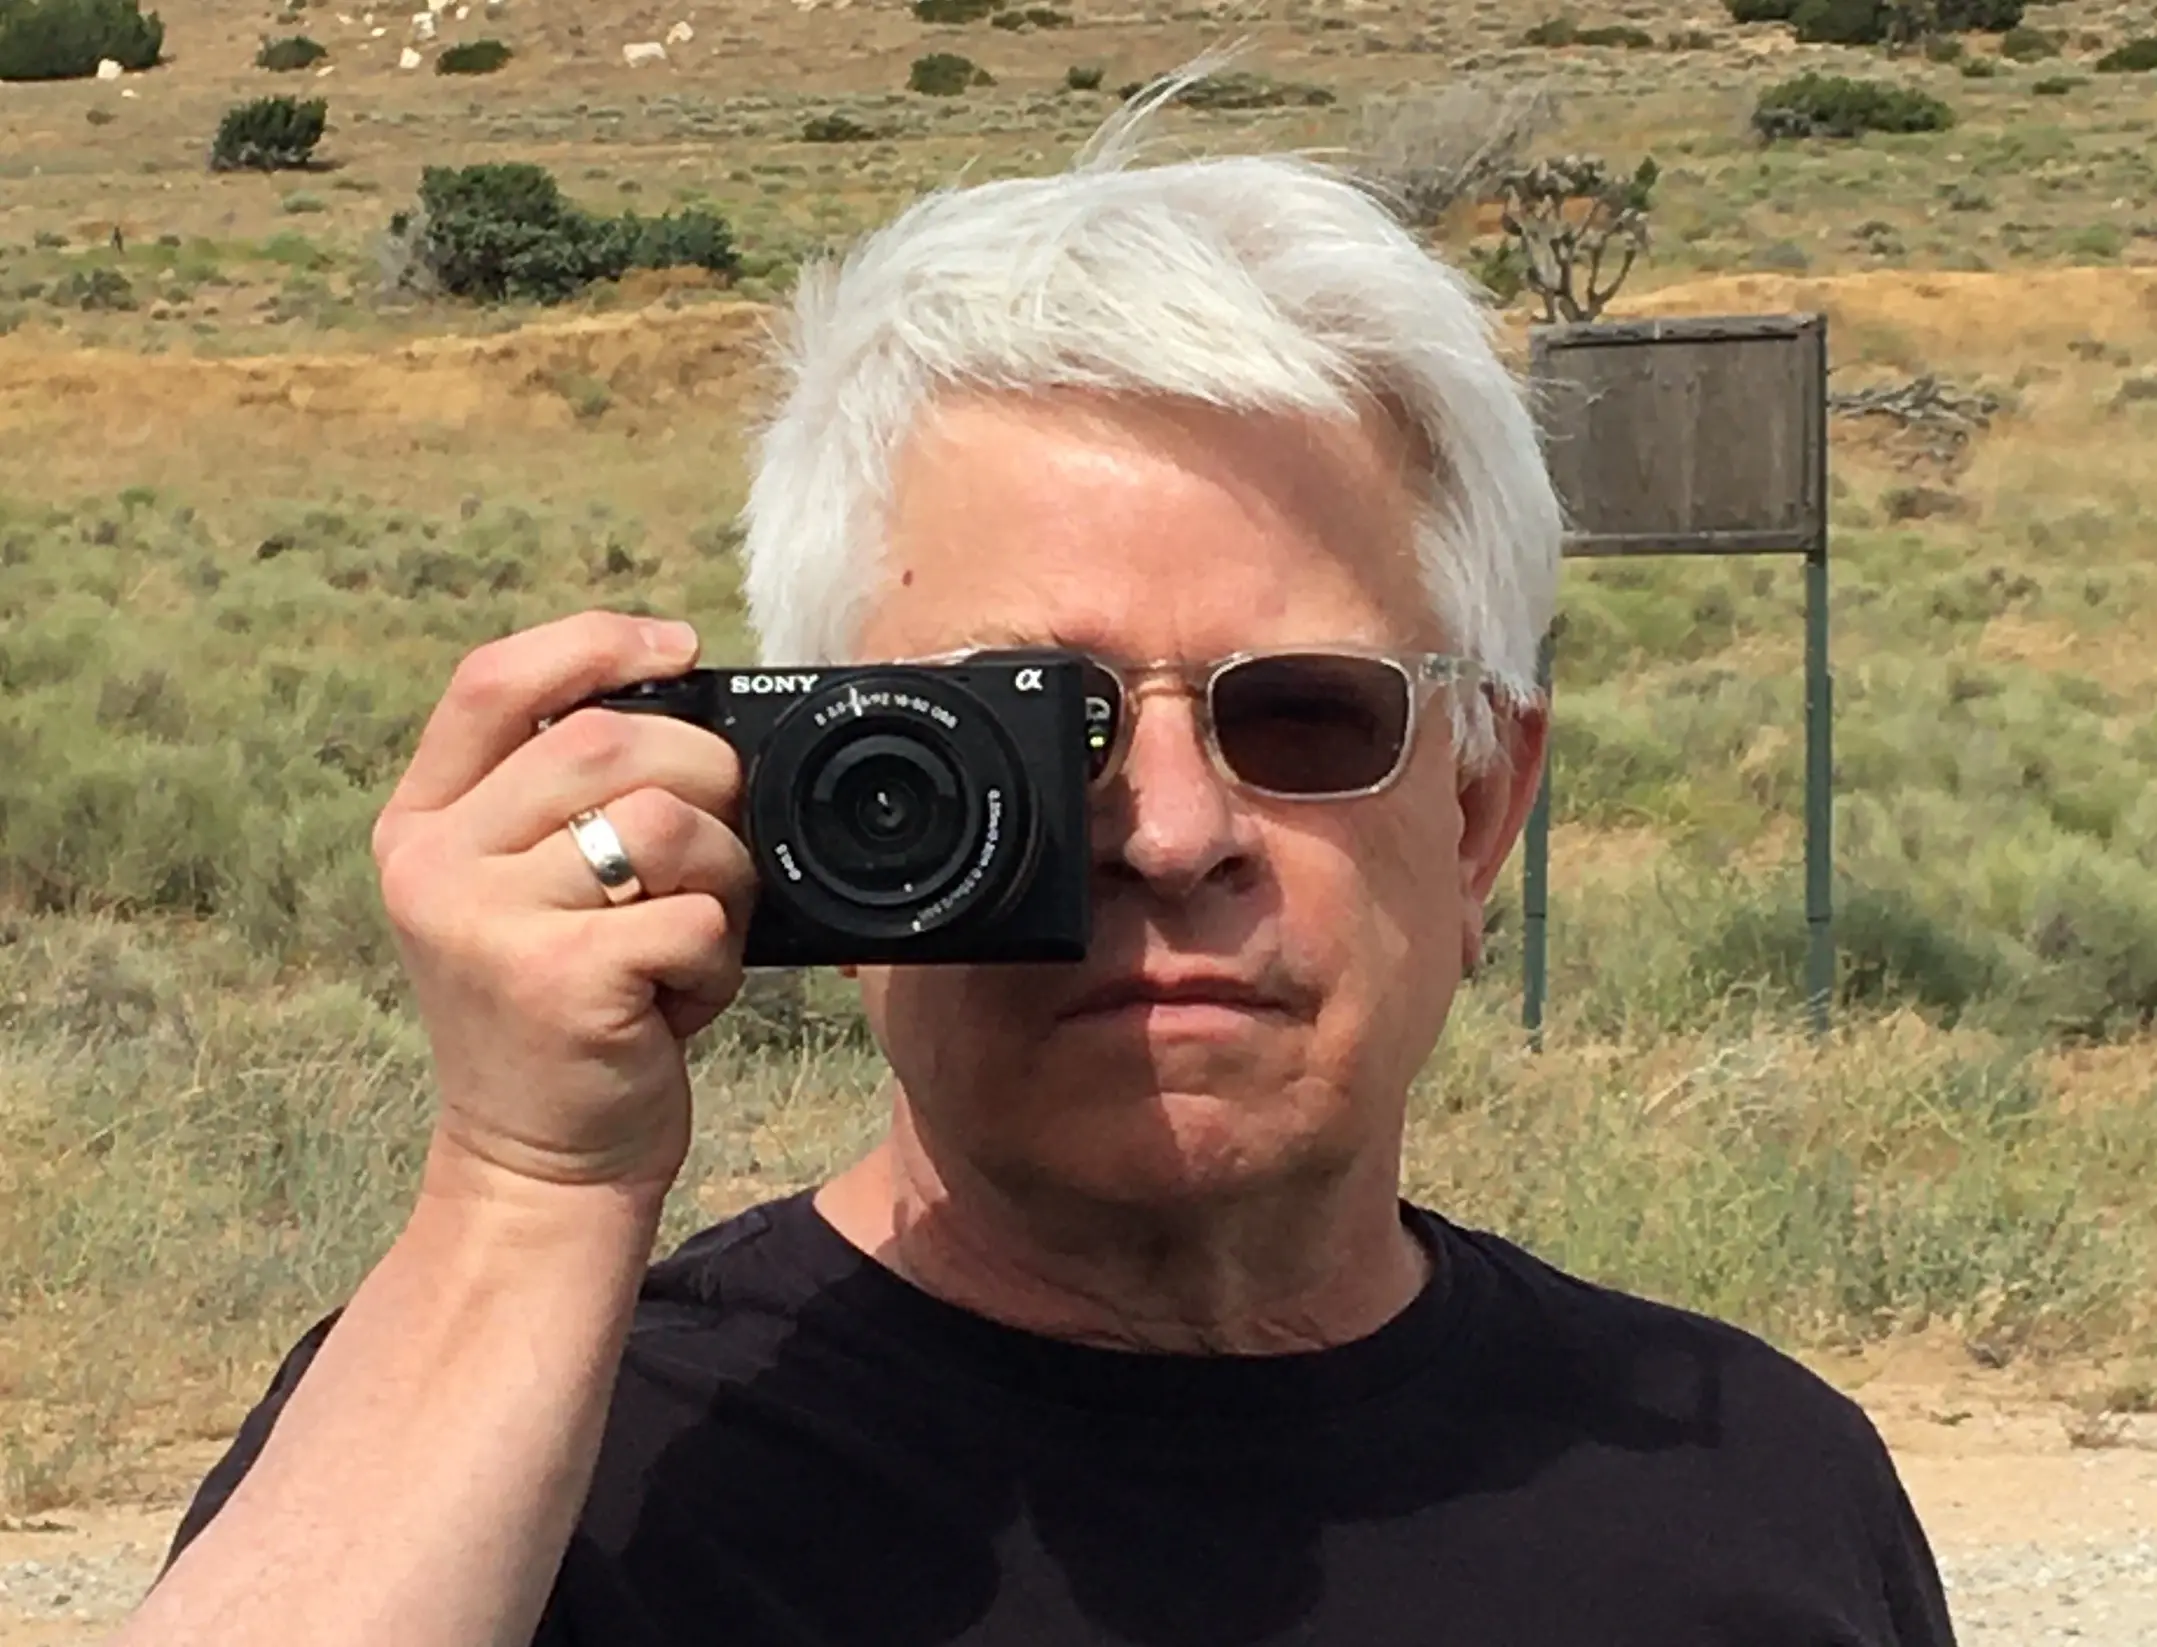 A white man with white hair and black t-shirt, wearing sunglasses and holding a camera over his left eye pointed at the viewer.